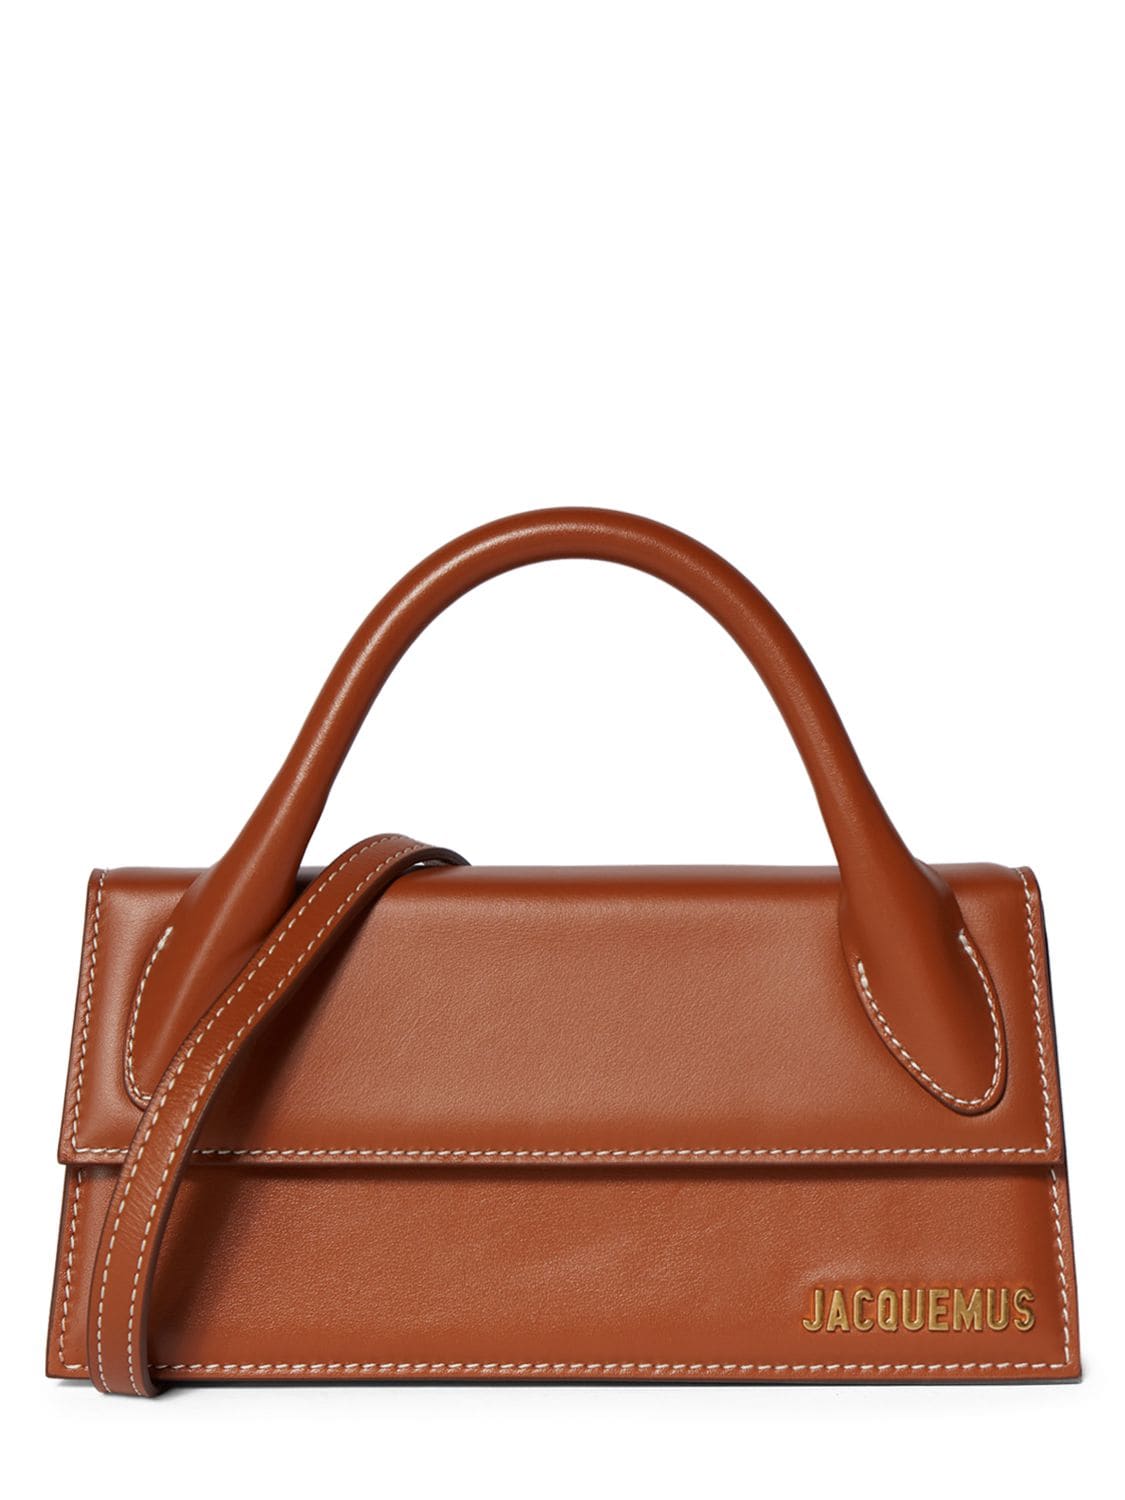 Jacquemus Le Chiquito Long Leather Top Handle Bag In Light Brown